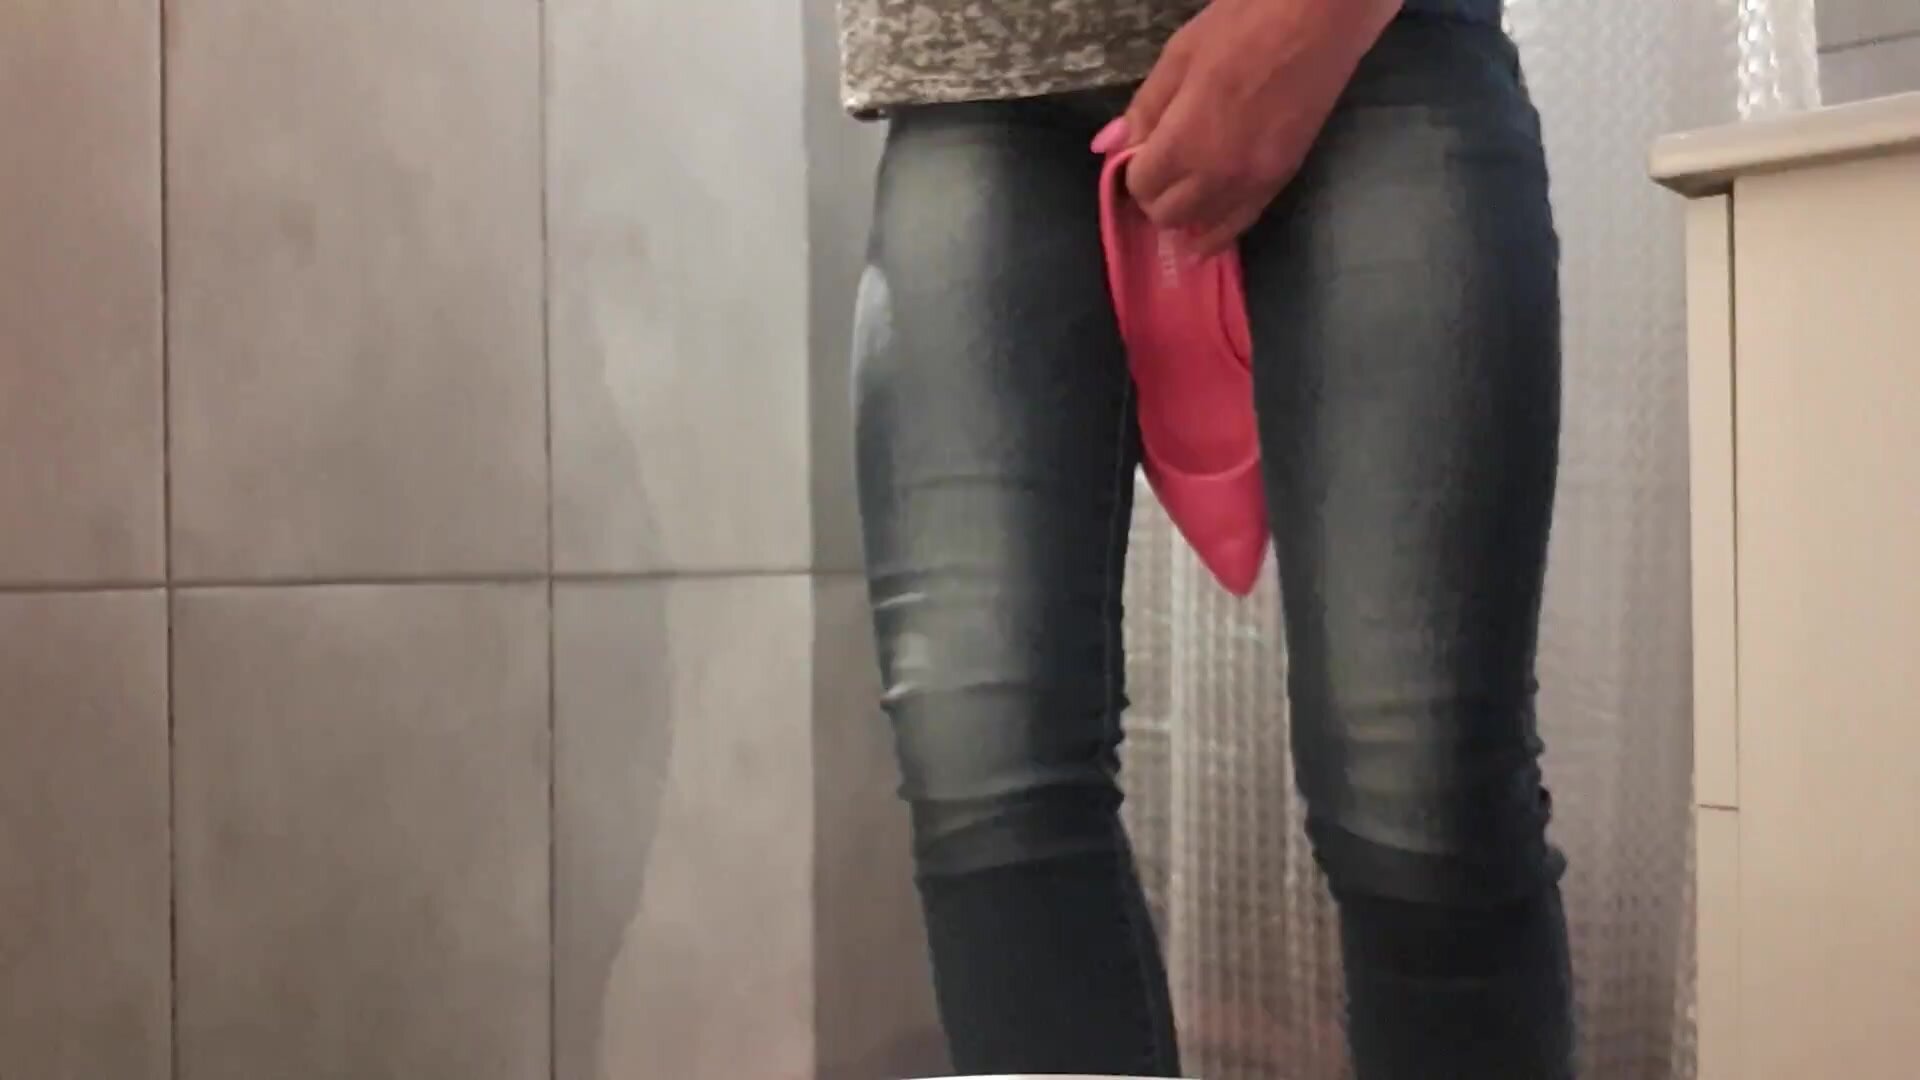 girl wetting jeans with high heel